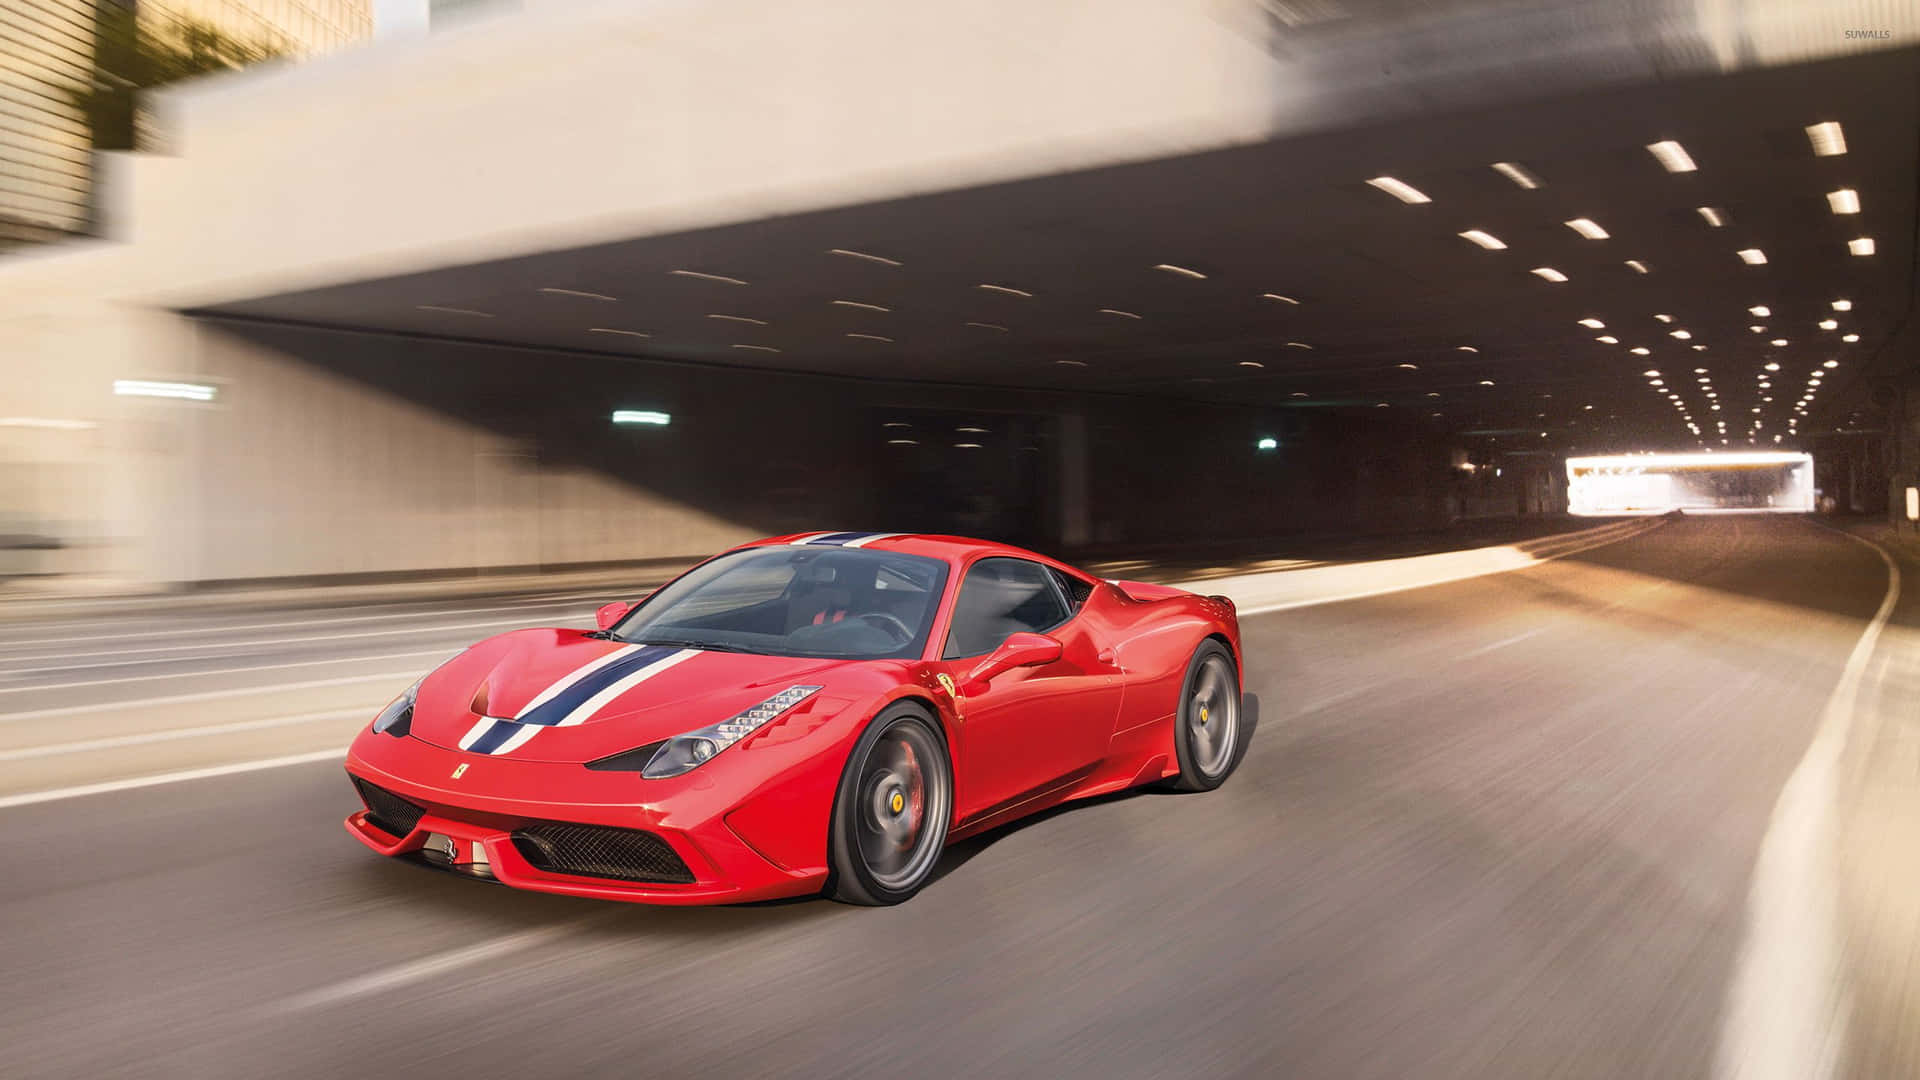 Stunning Ferrari 458 Speciale with a Powerful Stance Wallpaper